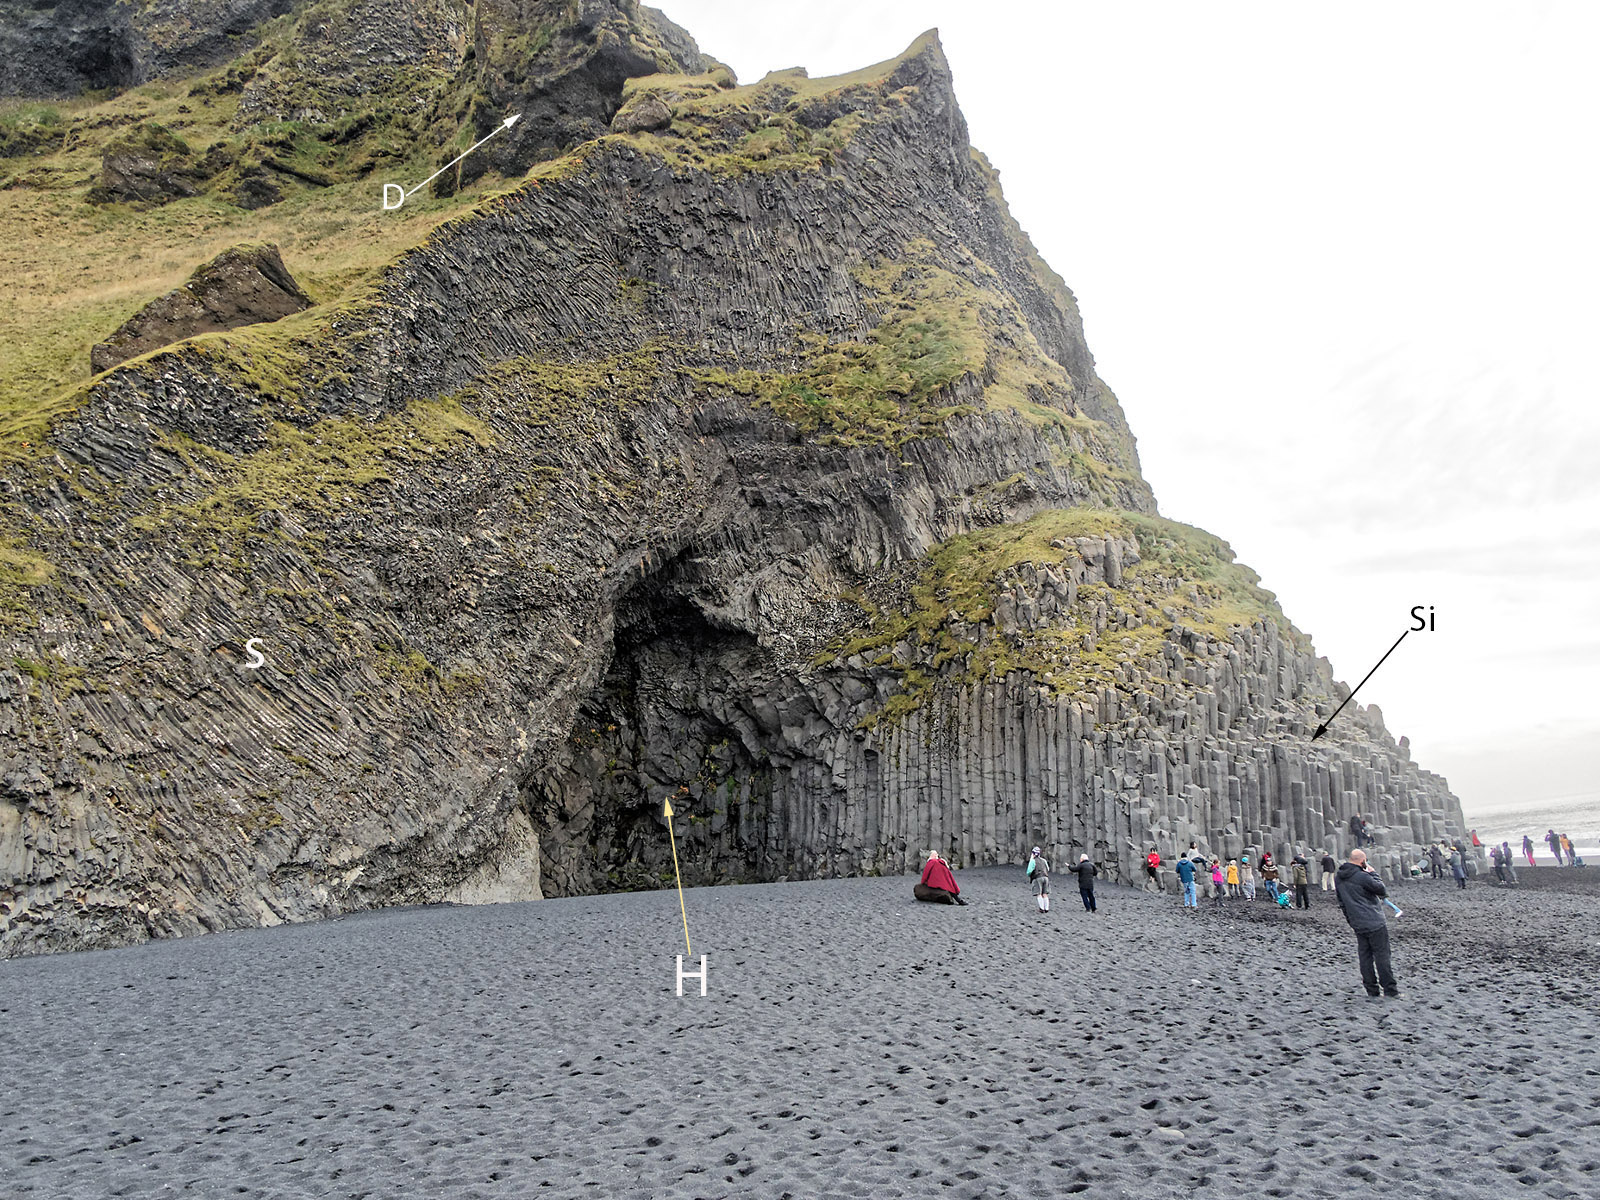 Complex igneous rock deposits at Reynisfjara. Vertical columnar basalt on the right is consistent with a sill (Si). Inclined sheets (S) of columnar basalt in the next higher layer is consistent with a superimposed lava flow cooling around the upper edges of the sill. A cave, Hálsanefshellir, in the sill and inclined sheets was the result of sea erosion. An intrusive dike (D) of basalt protrudes above the surface.